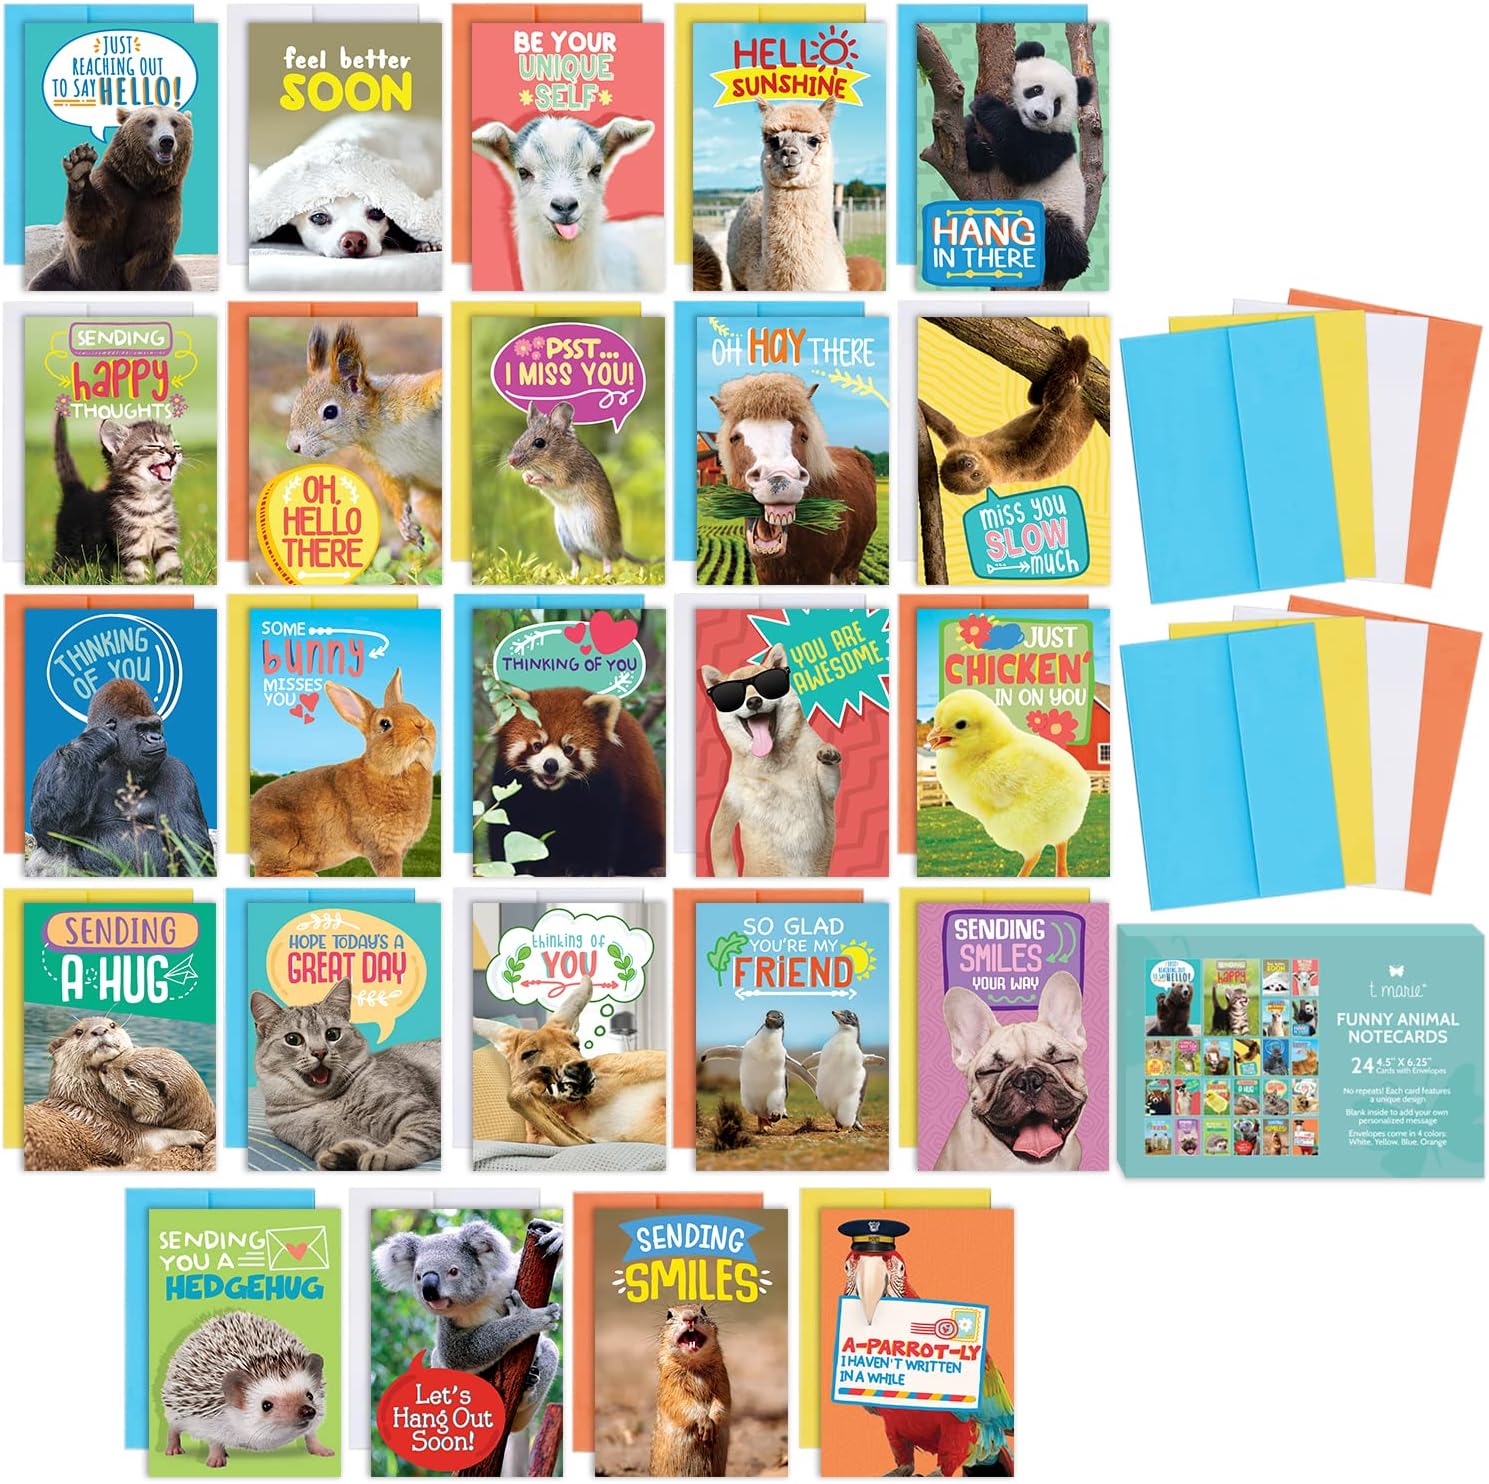 T MARIE 24 Funny Animal Greeting Cards Set with Envelopes Review